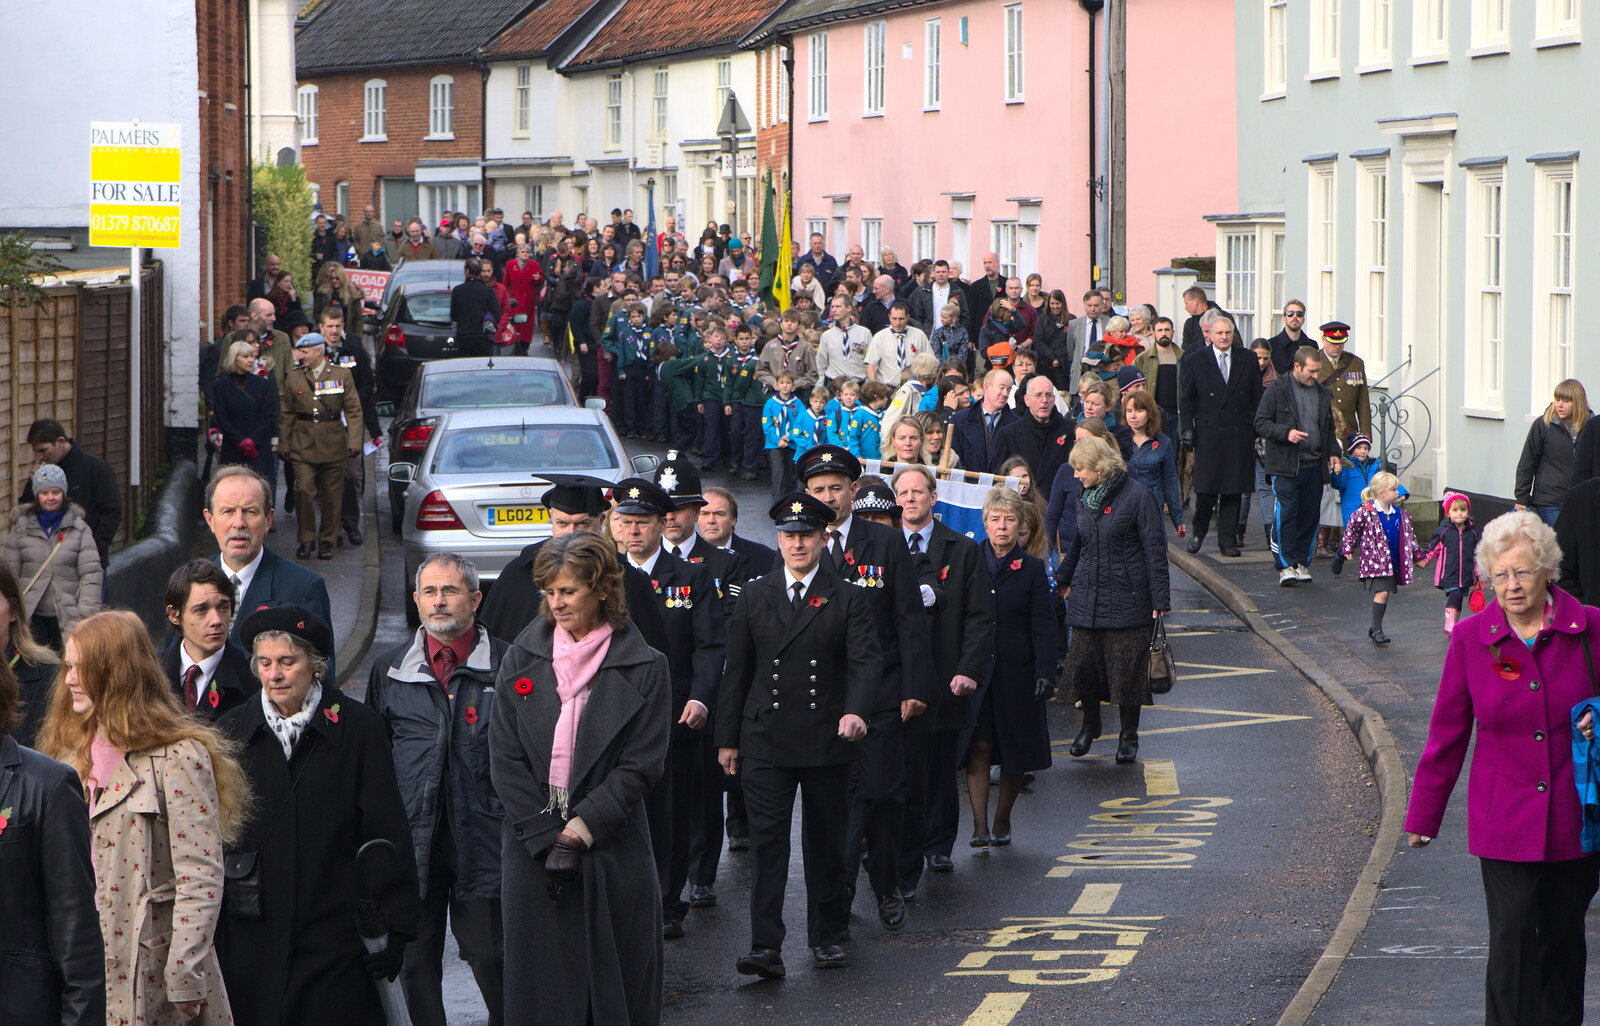 A good turn out fills Church Street from A Remembrance Sunday Parade, Eye, Suffolk - 9th November 2014